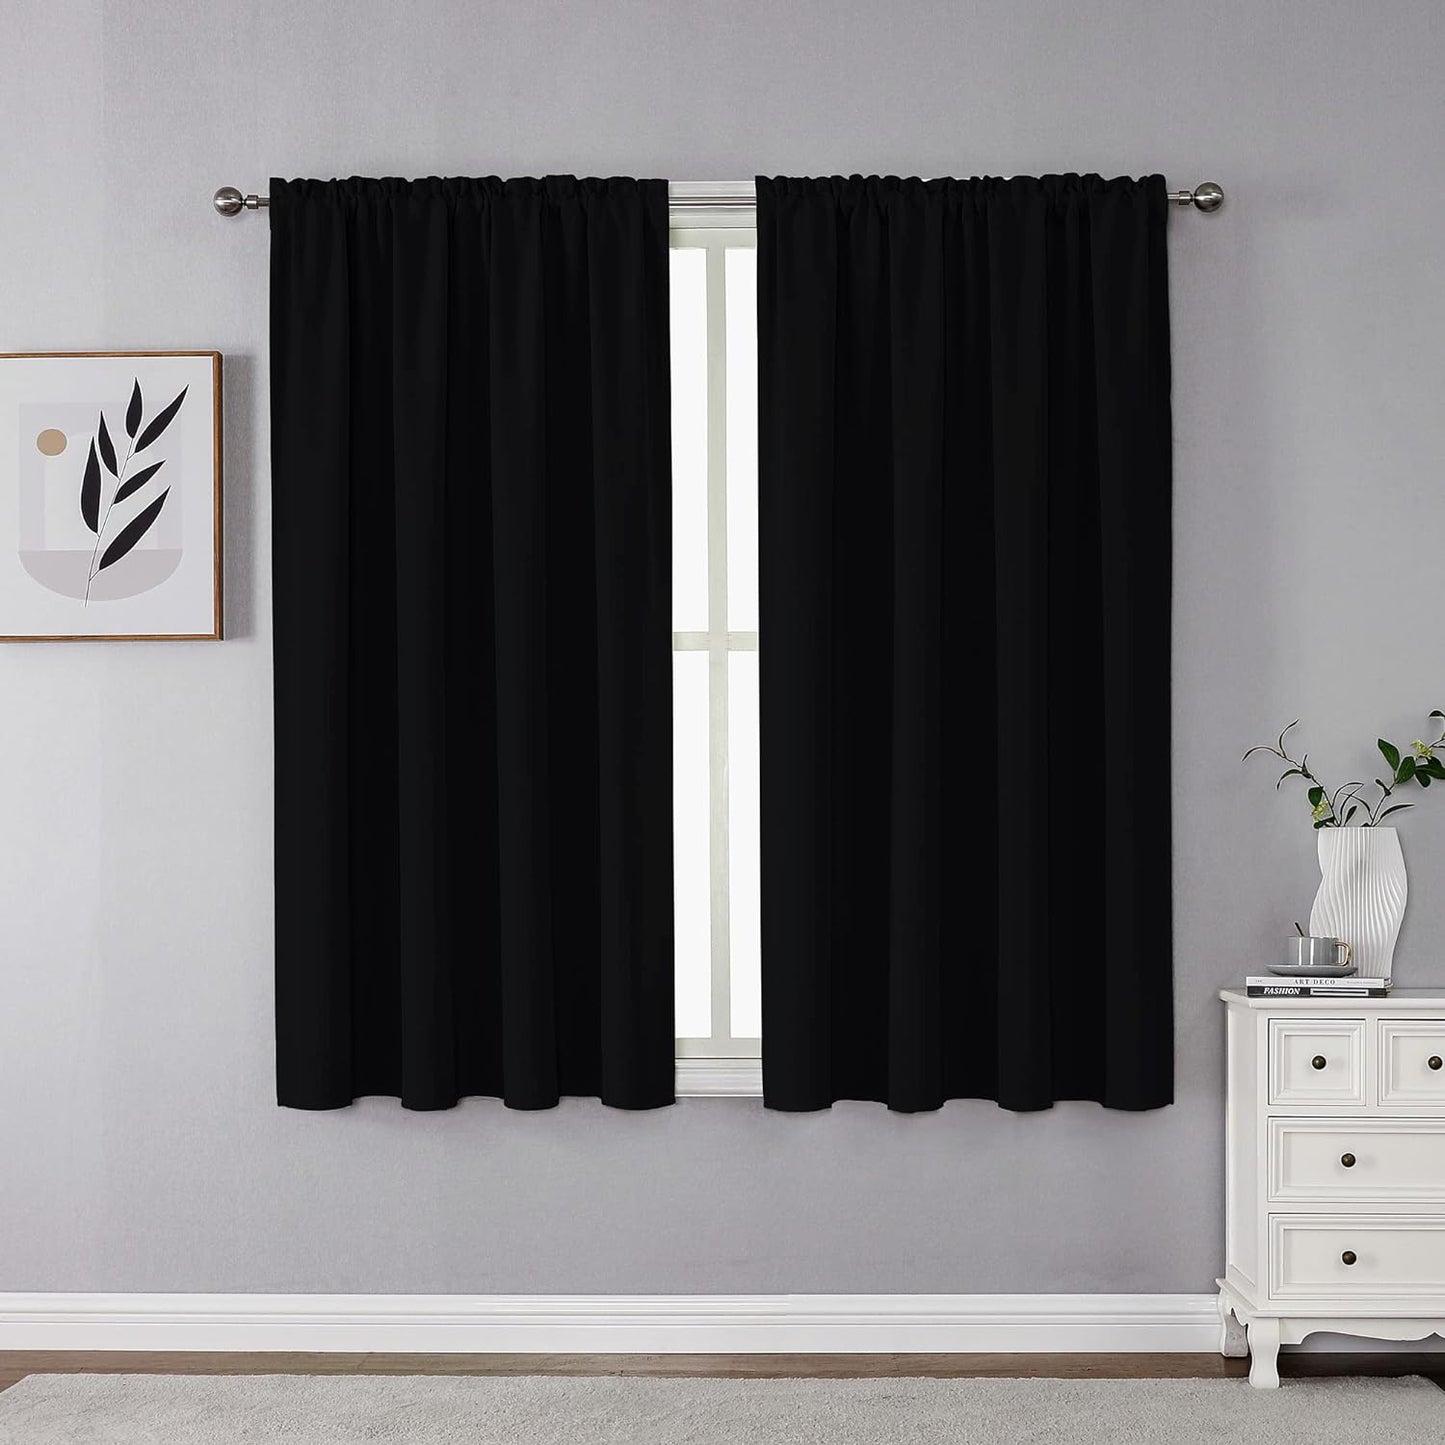 CUCRAF Blackout Curtains 84 Inches Long for Living Room, Light Beige Room Darkening Window Curtain Panels, Rod Pocket Thermal Insulated Solid Drapes for Bedroom, 52X84 Inch, Set of 2 Panels  CUCRAF Black 52W X 63L Inch 2 Panels 